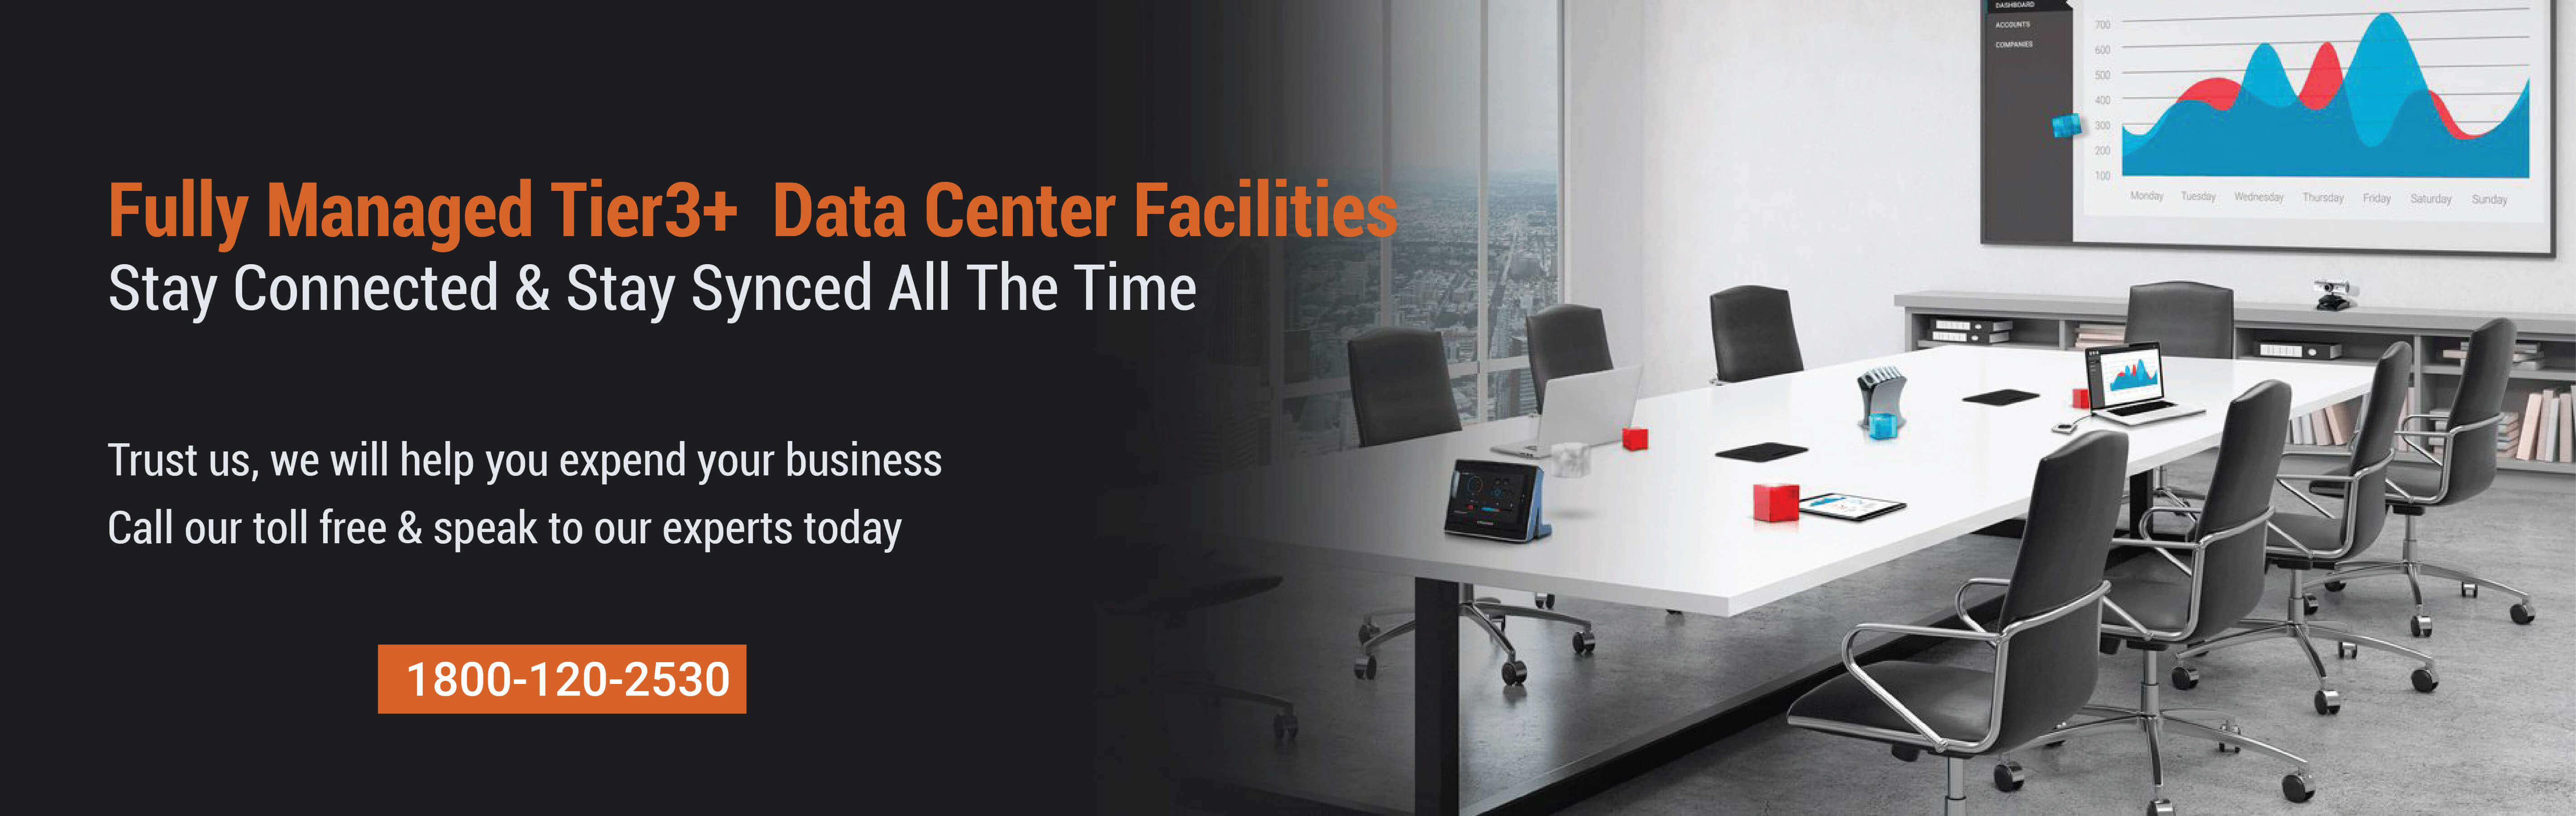 fully-managed-tier3+data-center